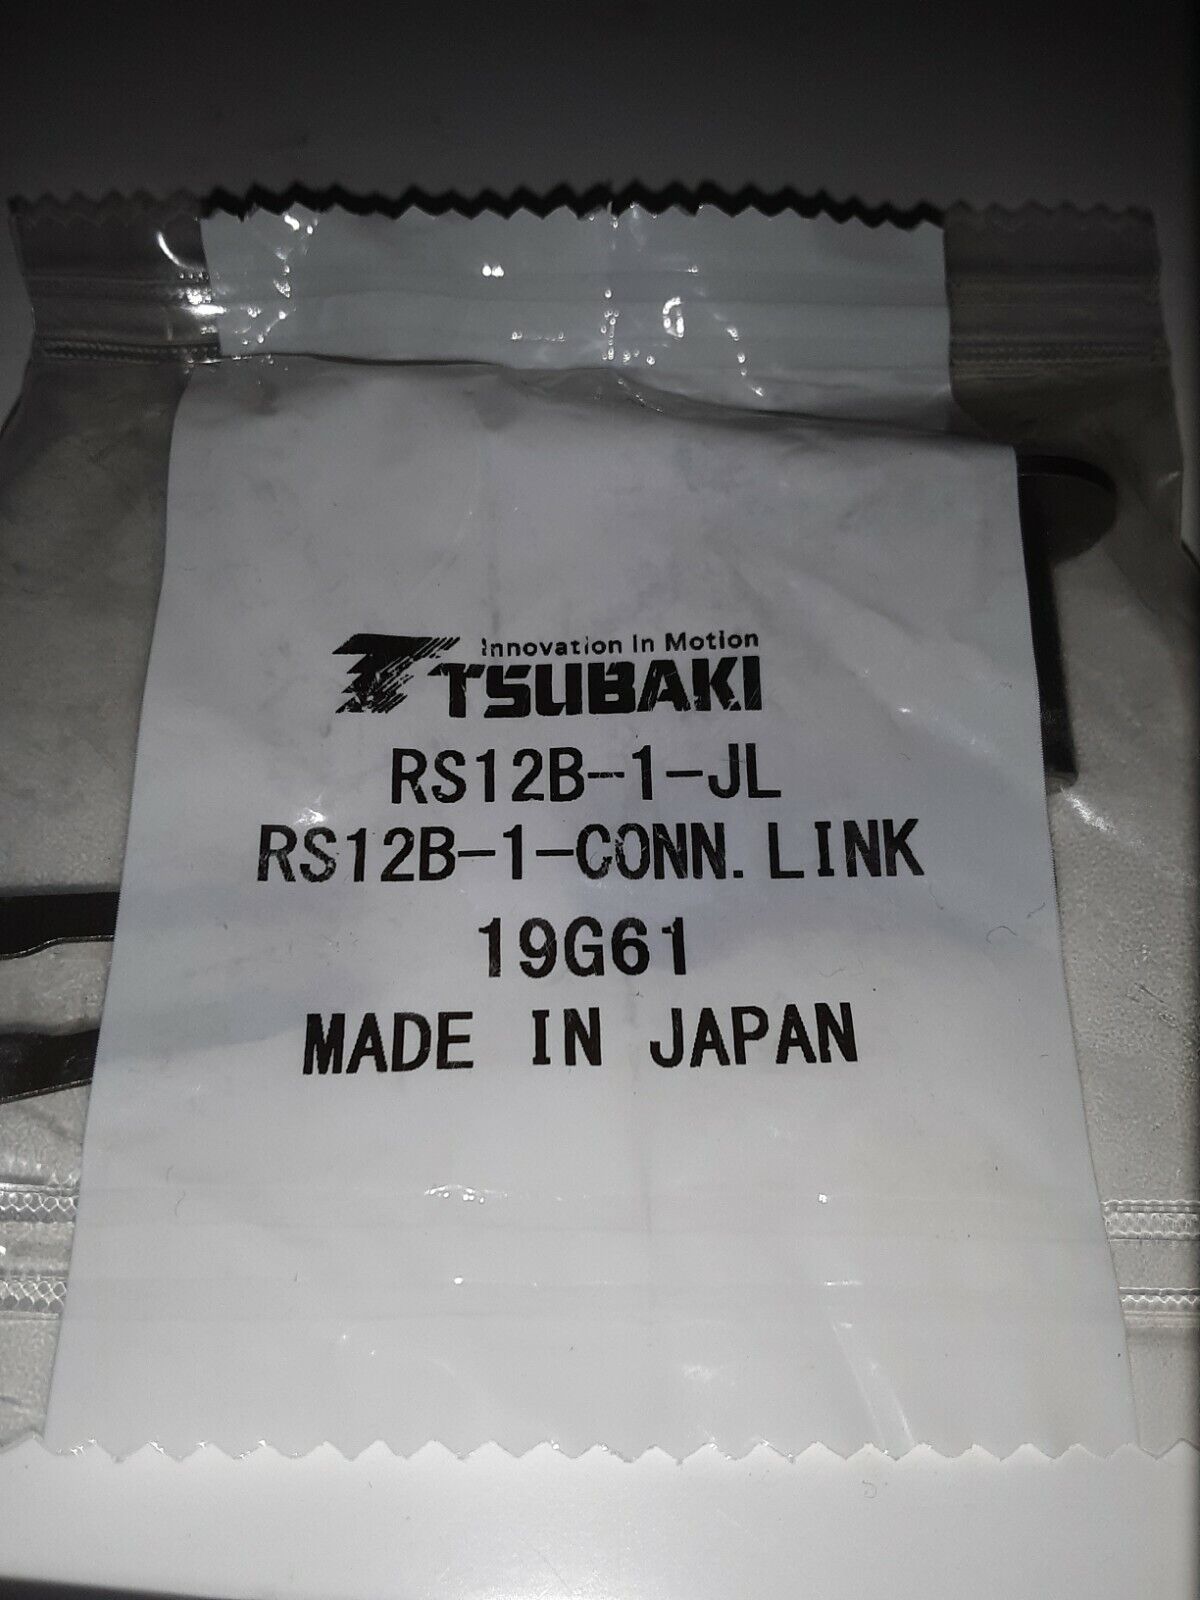 Max 85% OFF Tsubaki RS12B-1-JL Connecting Link New Easy-to-use 19G61 RS12B Chain